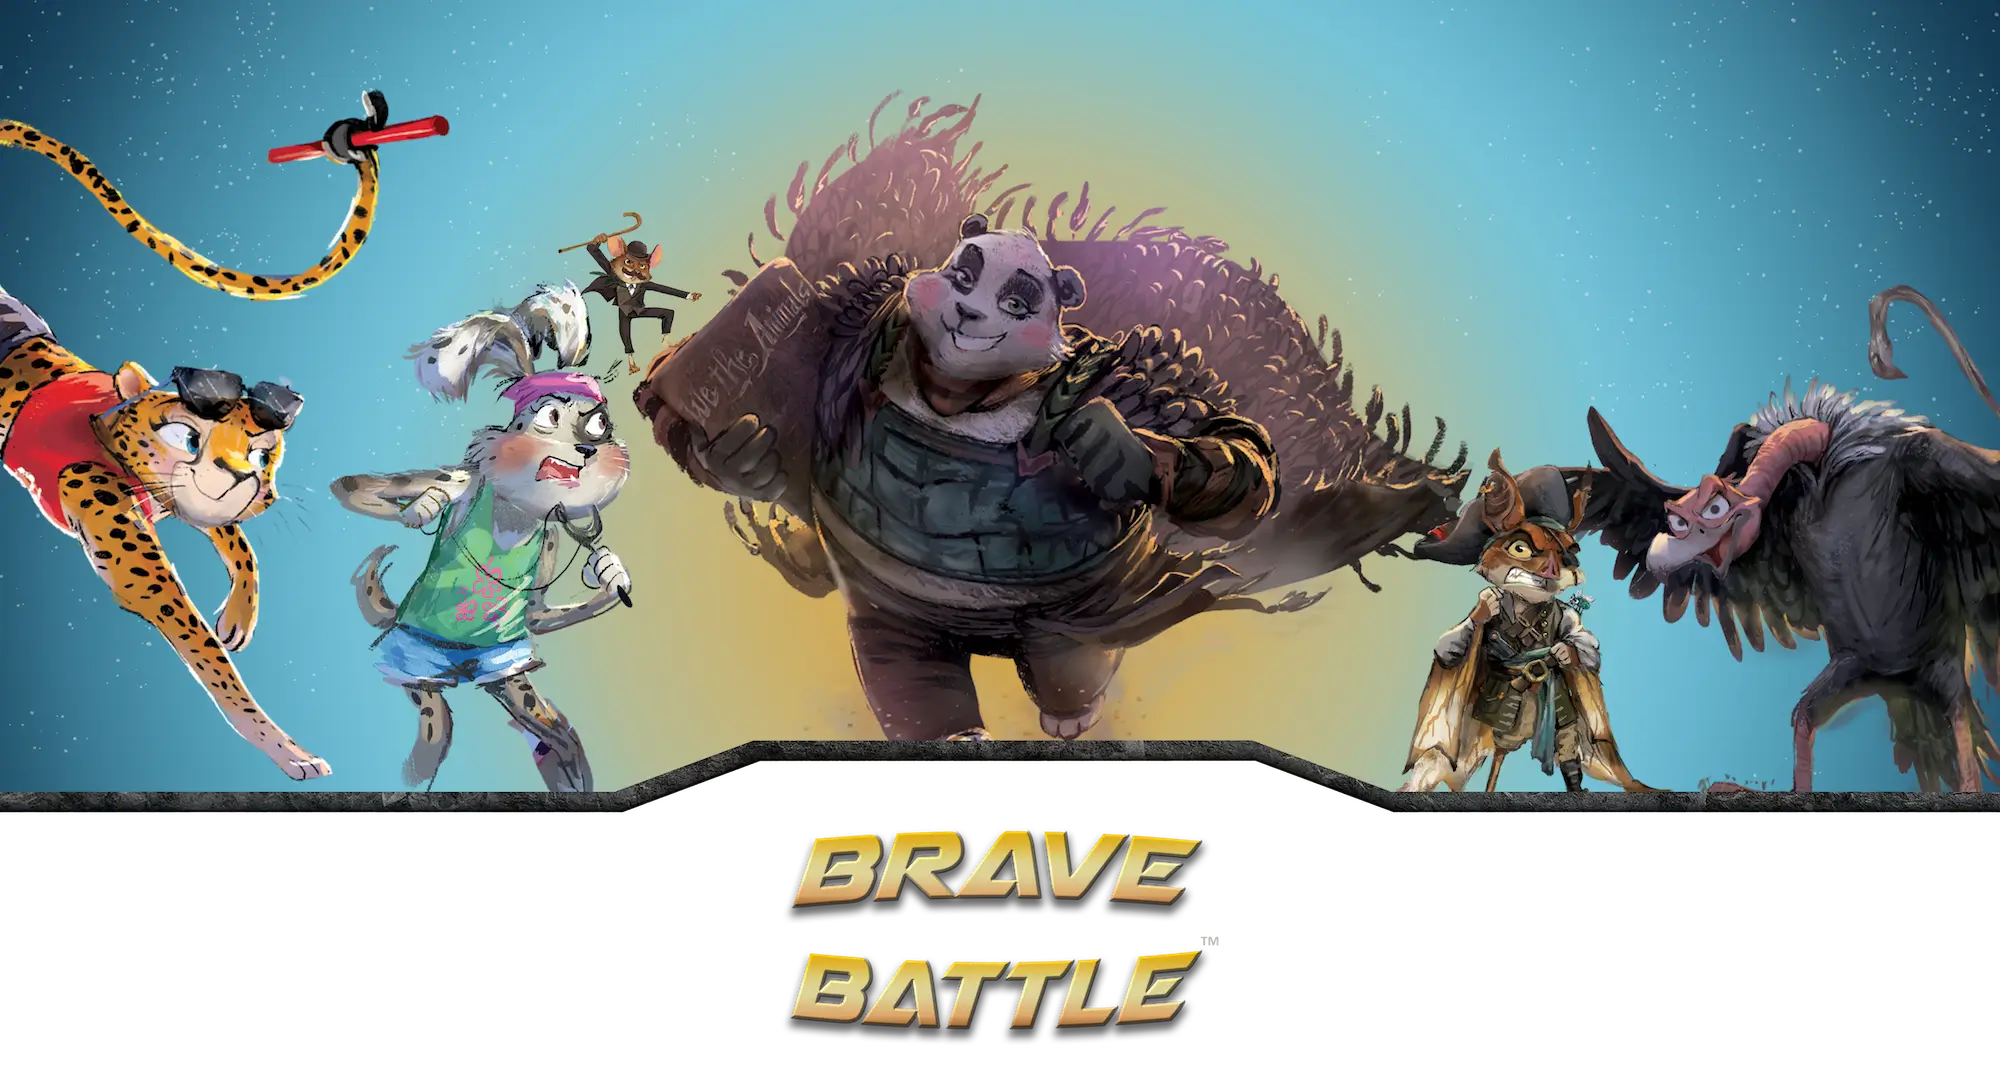 BRAVE Battle card game characters